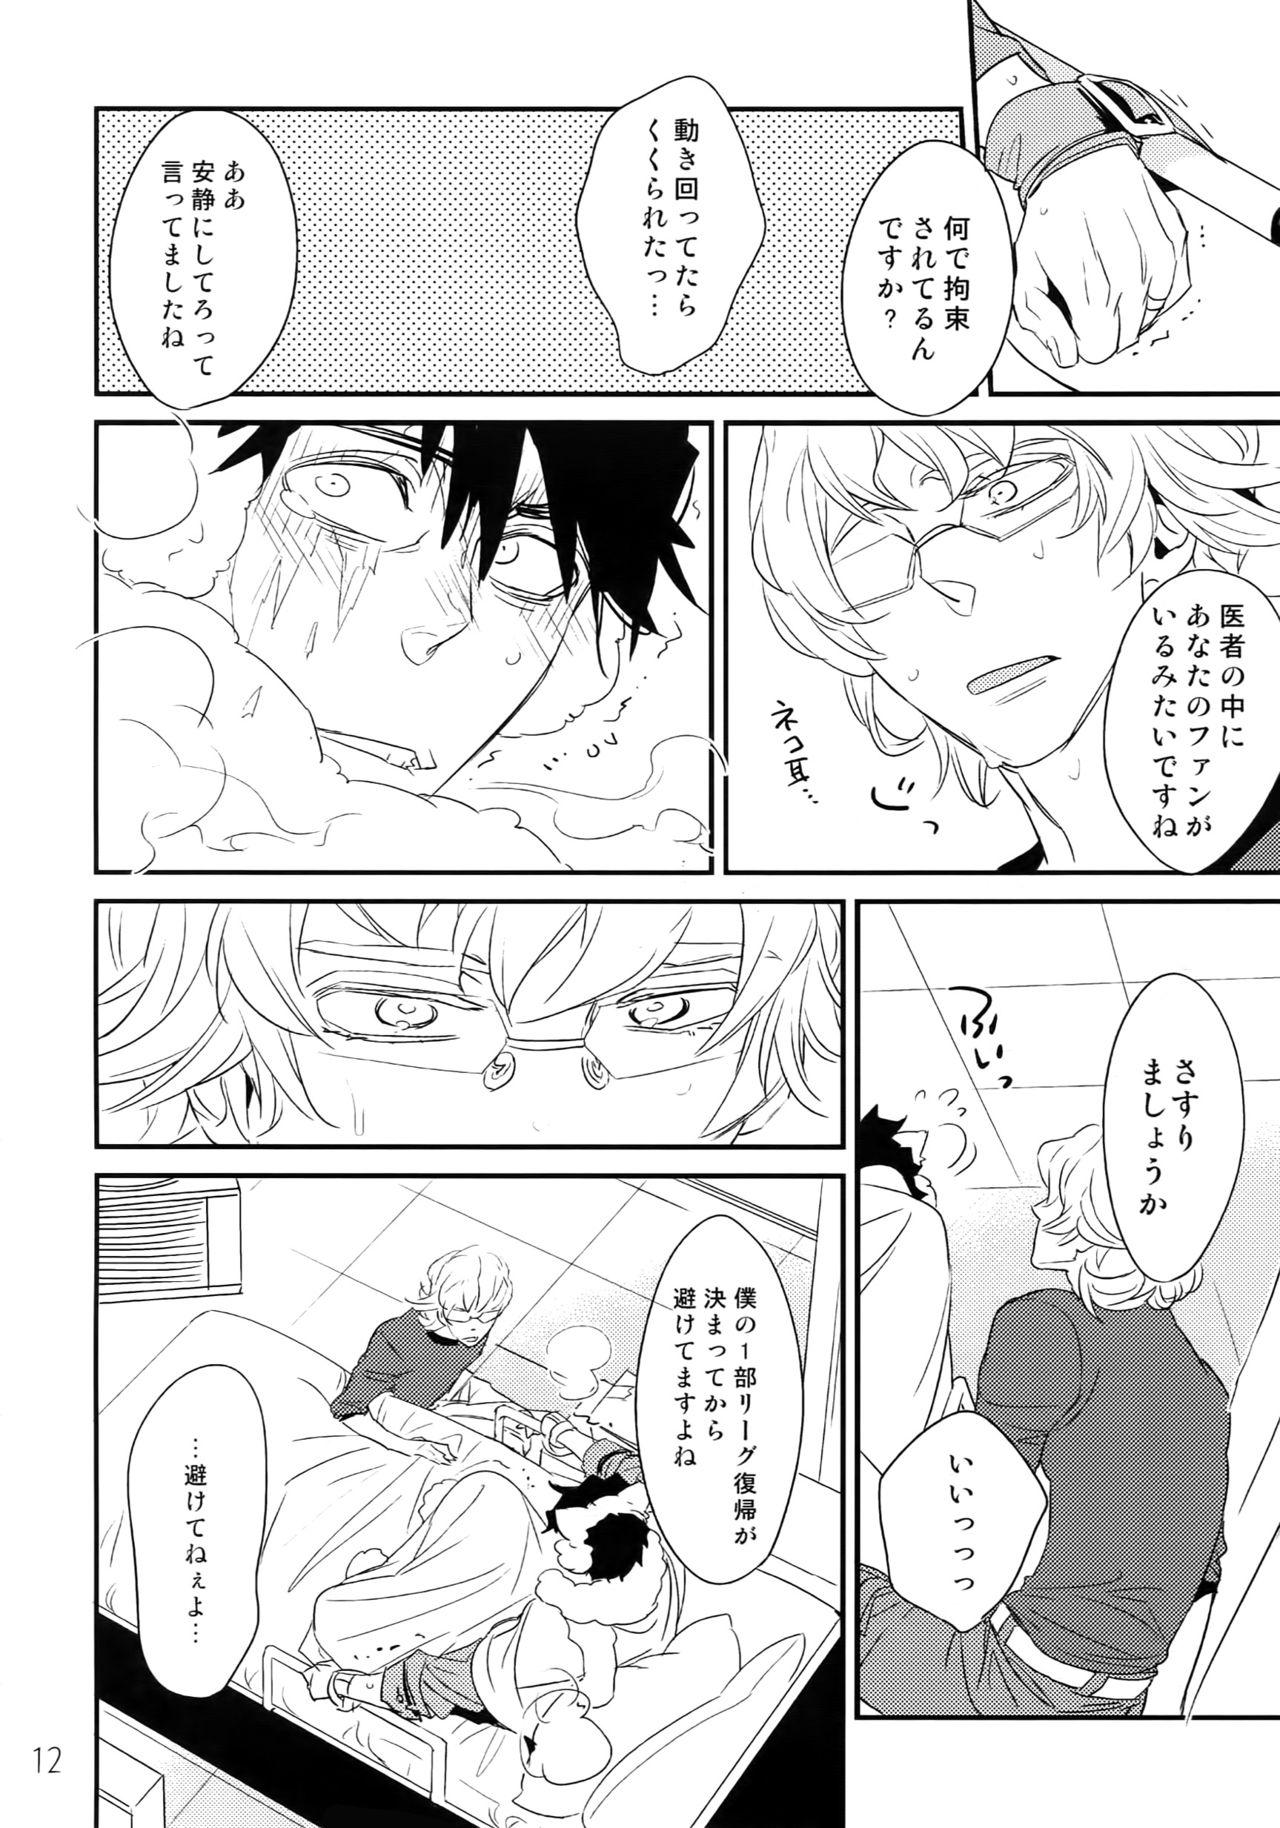 Lezbi T&B Re-CRUSH!3 - Tiger and bunny Bj - Page 11